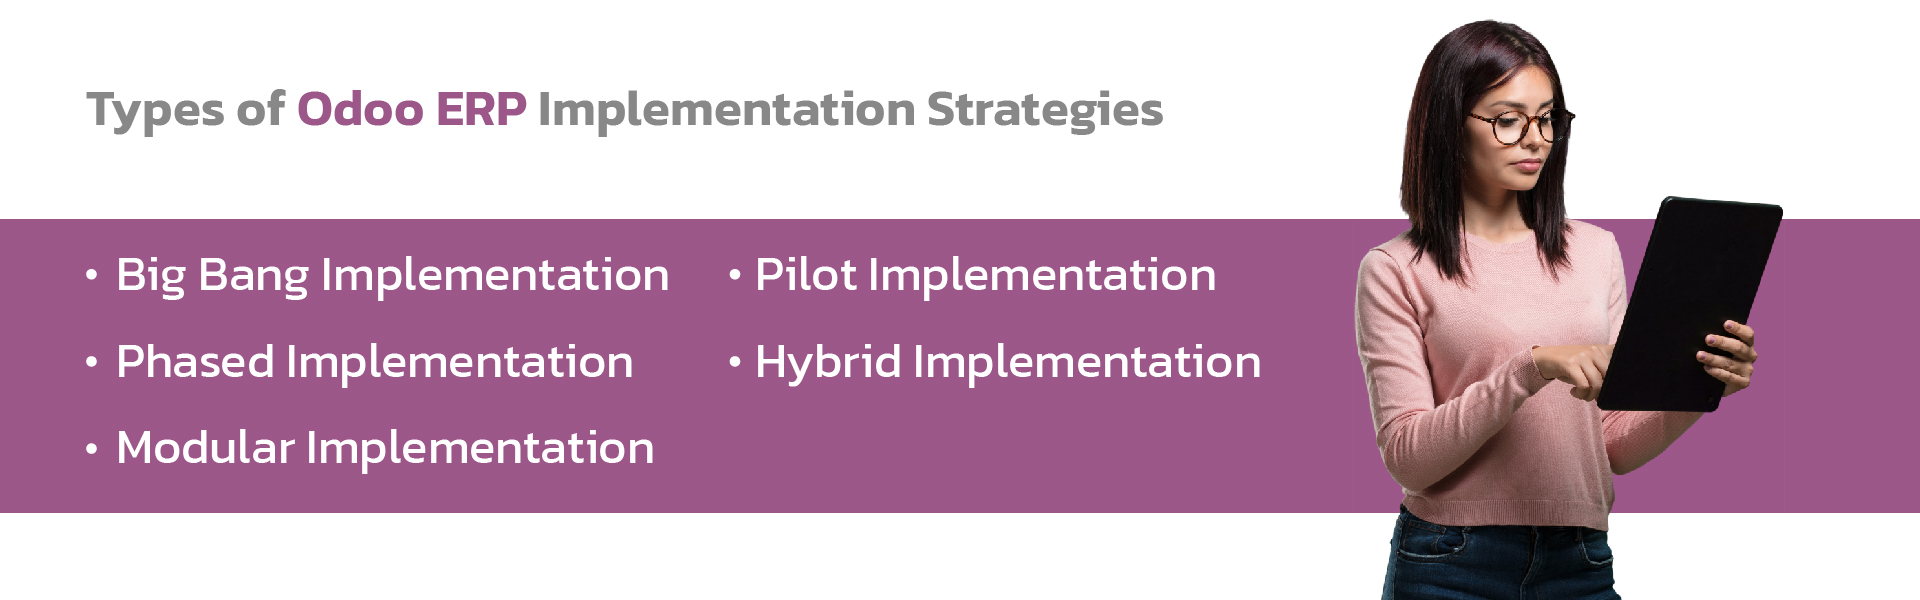 Types of Odoo Implementation